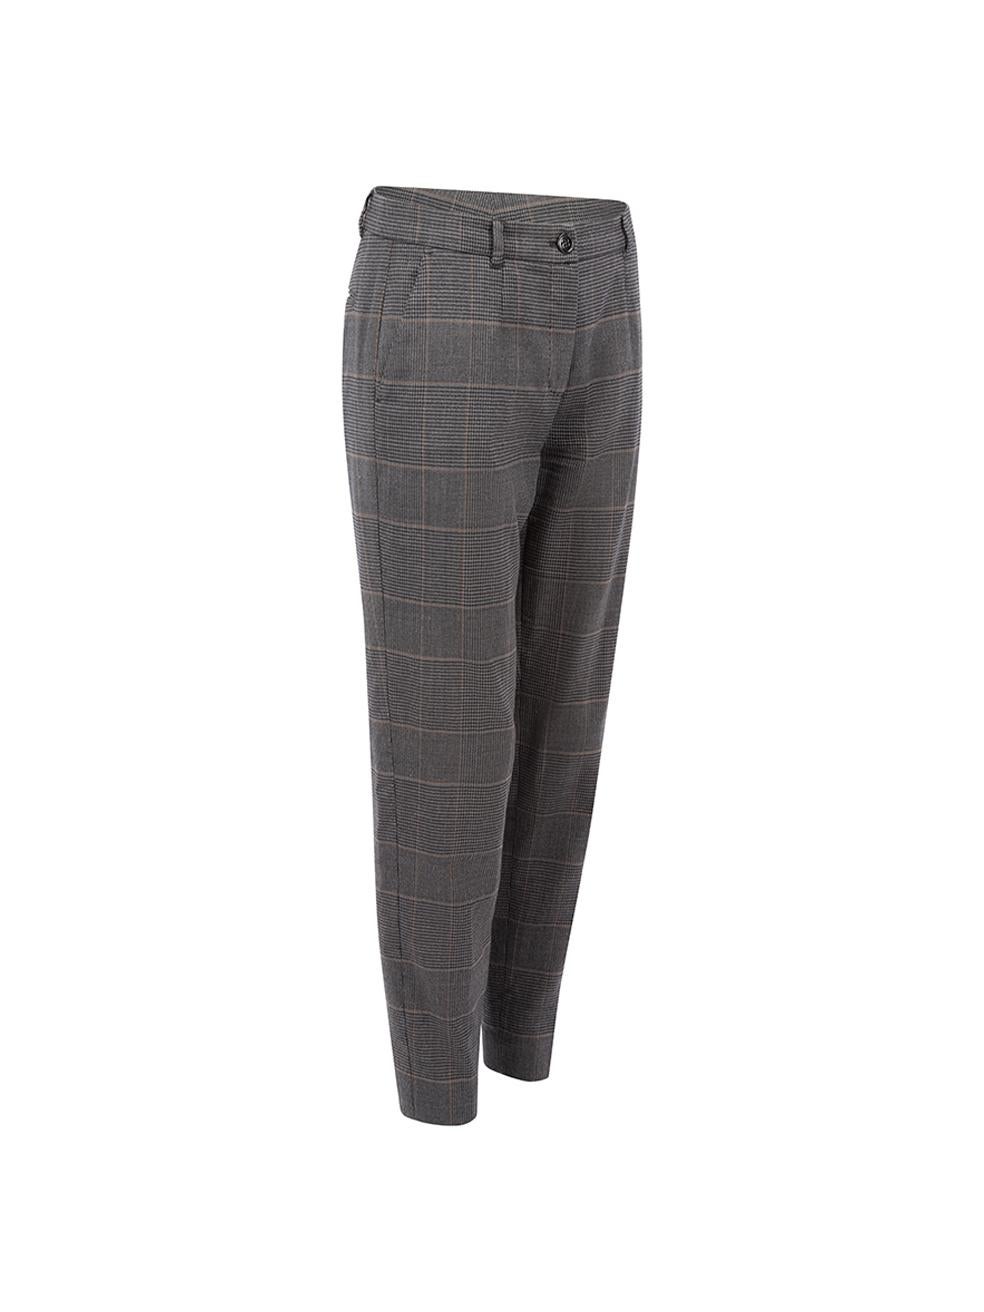 CONDITION is Very good. Hardly any visible wear to trousers is evident on this used Dolce & Gabbana designer resale item.   Details  Grey Wool Slim fit trousers Low rise Ankle length Plaid pattern Front zip closure with buttons Belt hoops Front side